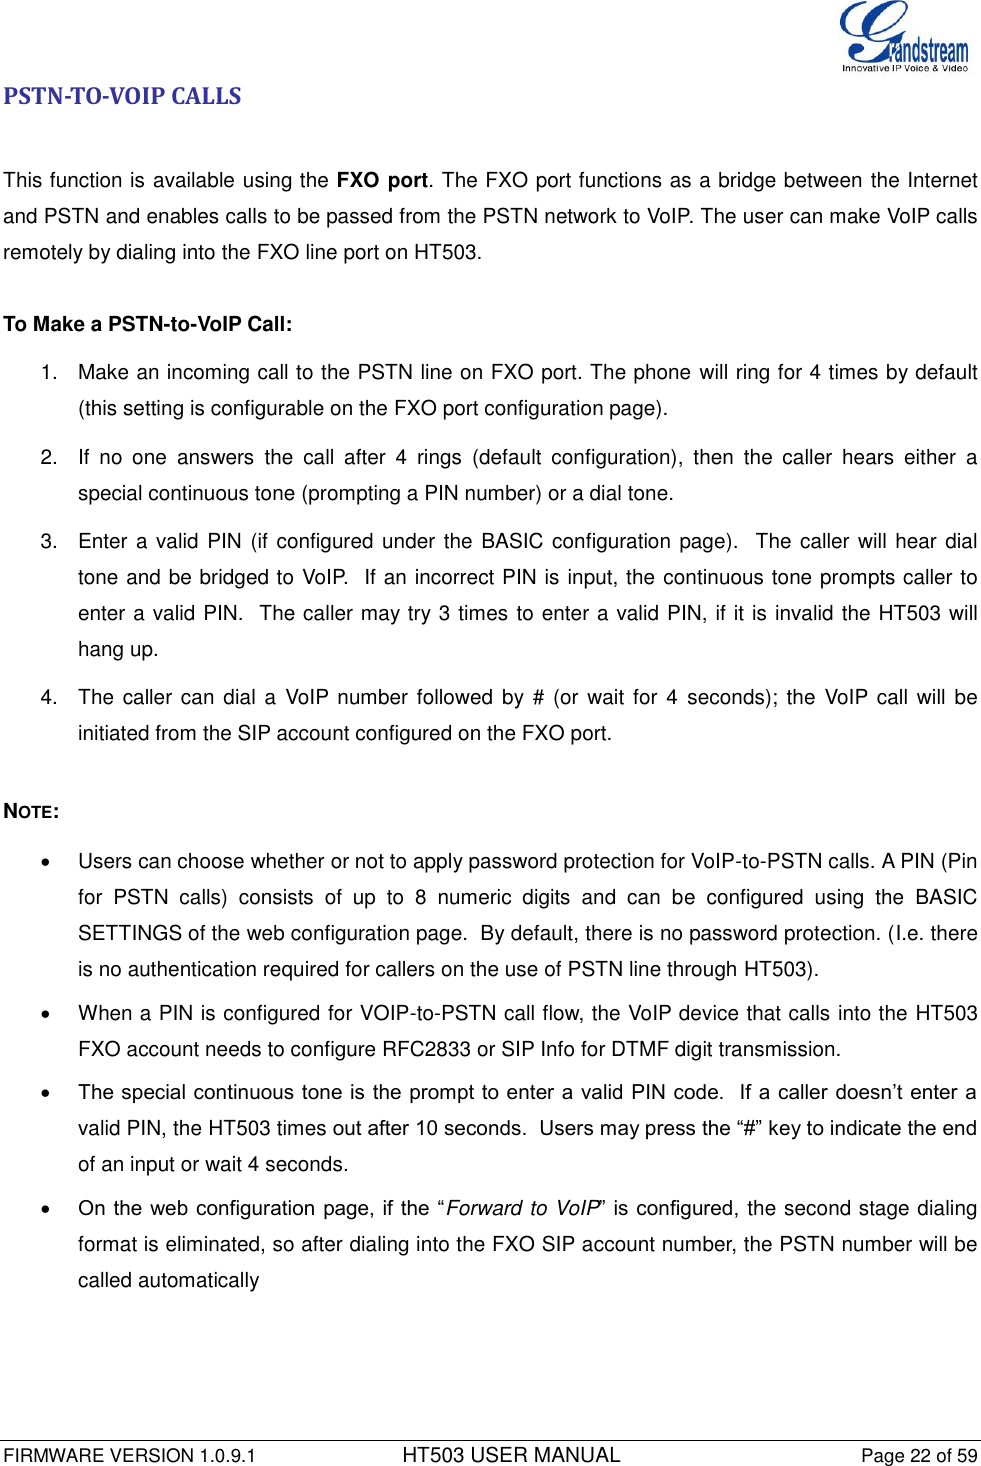  FIRMWARE VERSION 1.0.9.1          HT503 USER MANUAL Page 22 of 59       PSTN-TO-VOIP CALLS  This function is available using the FXO port. The FXO port functions as a bridge between the Internet and PSTN and enables calls to be passed from the PSTN network to VoIP. The user can make VoIP calls remotely by dialing into the FXO line port on HT503.   To Make a PSTN-to-VoIP Call: 1.  Make an incoming call to the PSTN line on FXO port. The phone will ring for 4 times by default (this setting is configurable on the FXO port configuration page). 2.  If  no  one  answers  the  call  after  4  rings  (default  configuration),  then  the  caller  hears  either  a special continuous tone (prompting a PIN number) or a dial tone. 3.  Enter a valid PIN (if configured under the BASIC configuration page).  The caller will hear dial tone and be bridged to VoIP.  If an incorrect PIN is input, the continuous tone prompts caller to enter a valid PIN.  The caller may try 3 times to enter a valid PIN, if it is invalid the HT503 will hang up. 4.  The caller can  dial a  VoIP number followed by # (or wait for  4  seconds);  the  VoIP call will be initiated from the SIP account configured on the FXO port.   NOTE:   Users can choose whether or not to apply password protection for VoIP-to-PSTN calls. A PIN (Pin for  PSTN  calls)  consists  of  up  to  8  numeric  digits  and  can  be  configured  using  the  BASIC SETTINGS of the web configuration page.  By default, there is no password protection. (I.e. there is no authentication required for callers on the use of PSTN line through HT503).     When a PIN is configured for VOIP-to-PSTN call flow, the VoIP device that calls into the HT503 FXO account needs to configure RFC2833 or SIP Info for DTMF digit transmission.   The special continuous tone is the prompt to enter a valid PIN code.  If a caller doesn’t enter a valid PIN, the HT503 times out after 10 seconds.  Users may press the “#” key to indicate the end of an input or wait 4 seconds.   On the web configuration page, if the “Forward to VoIP” is configured, the second stage dialing format is eliminated, so after dialing into the FXO SIP account number, the PSTN number will be called automatically  